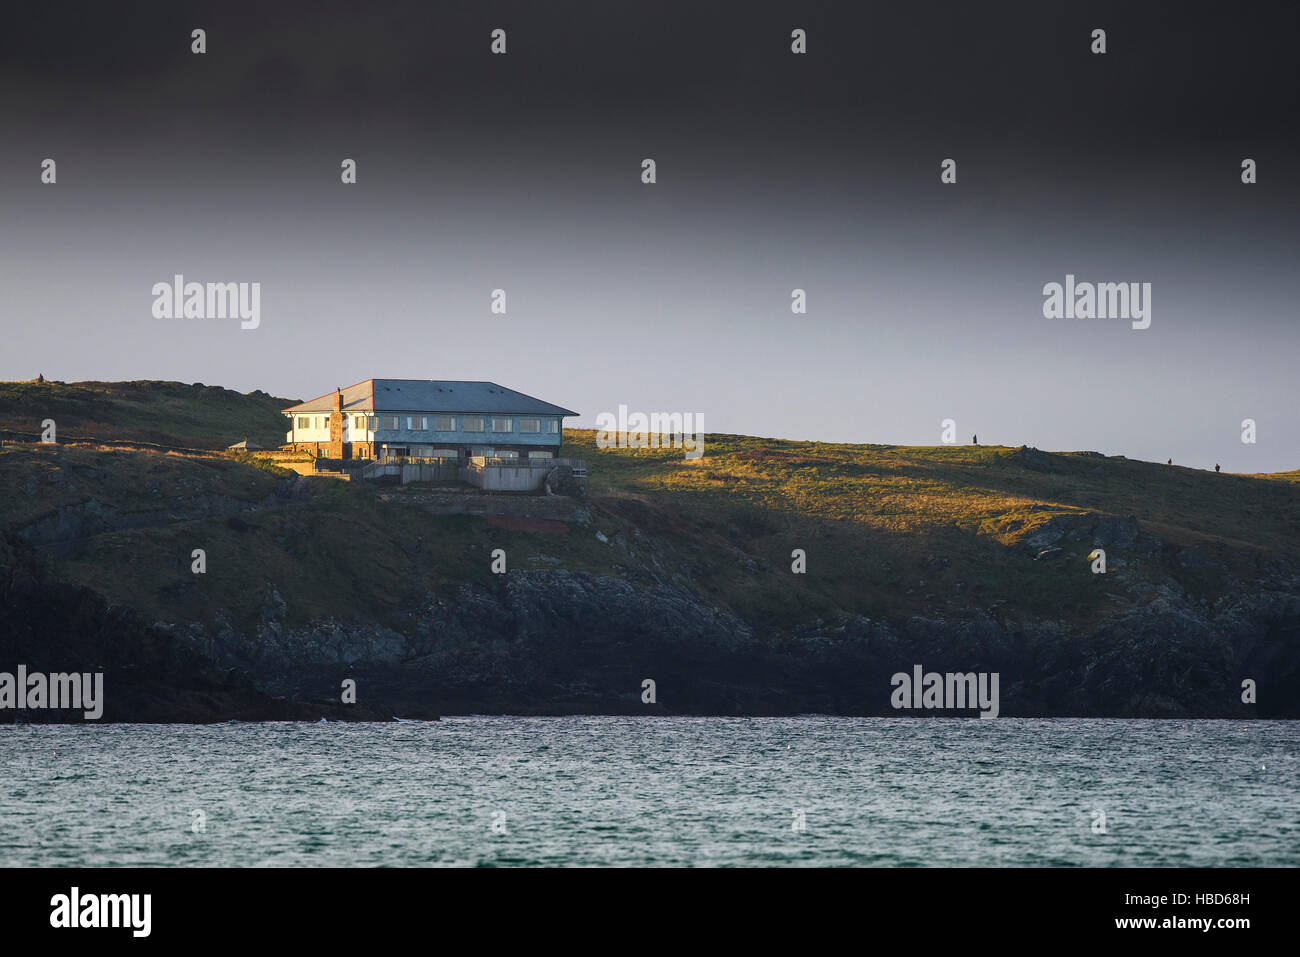 The Lewinnick Lodge Restaurant on the coast of East Pentire in Newquay, Cornwall. Stock Photo